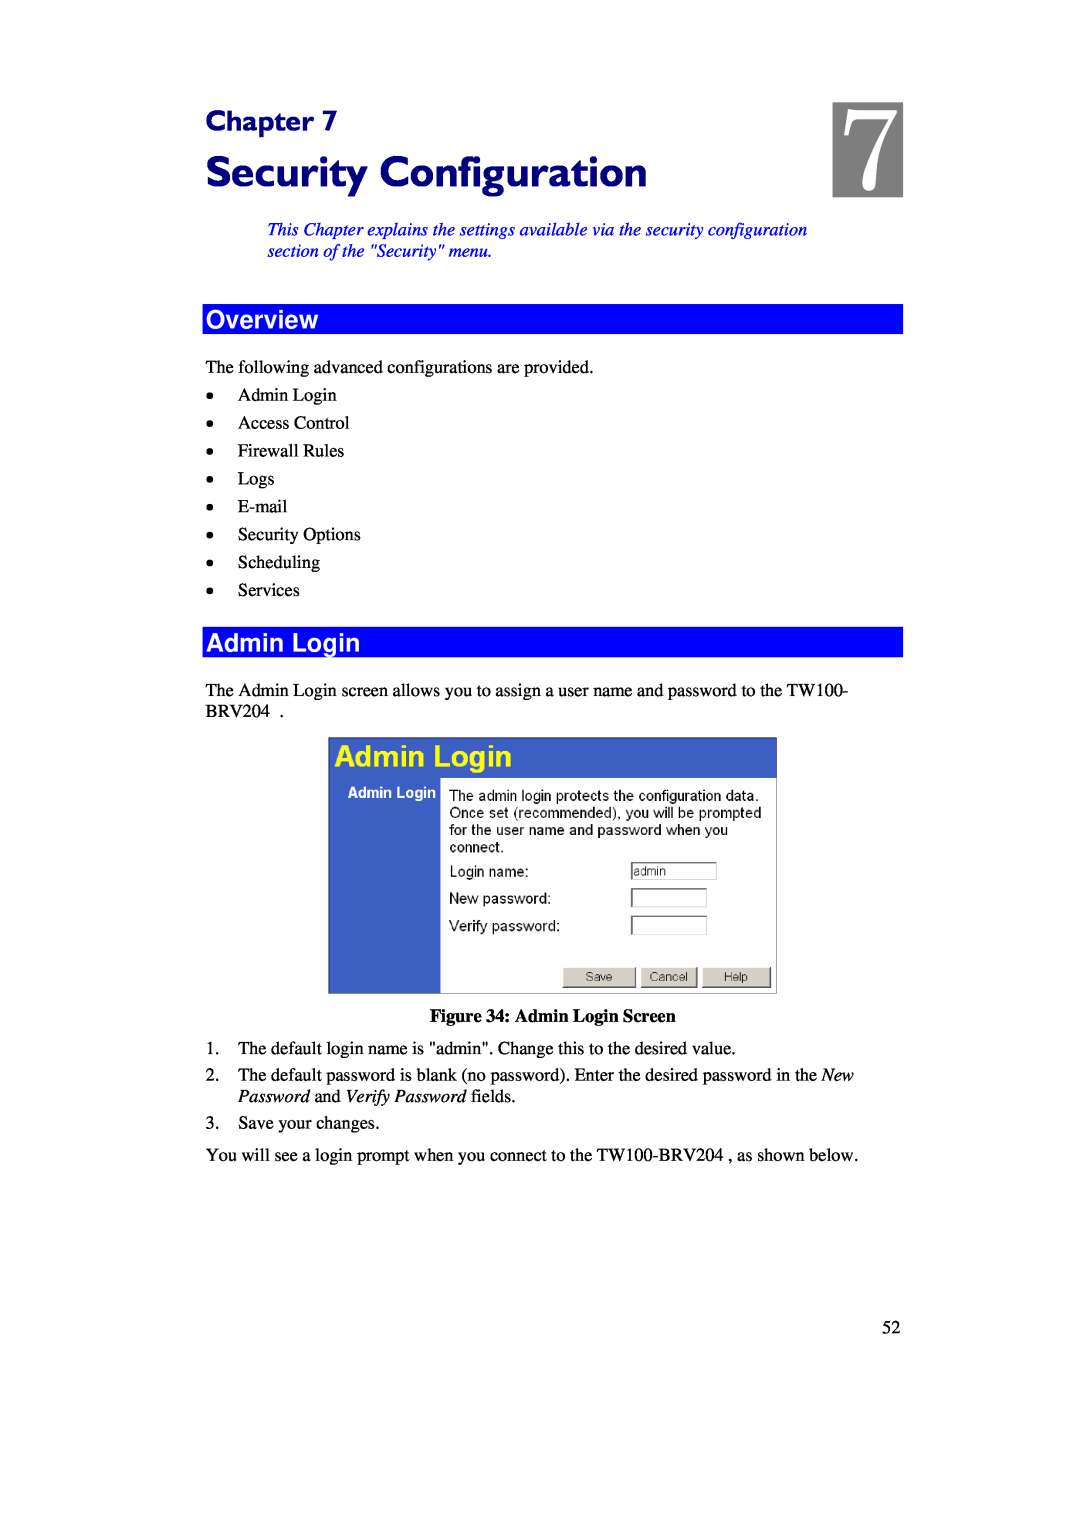 TRENDnet BRV204 manual Security Configuration, Chapter, Overview, Admin Login Screen 